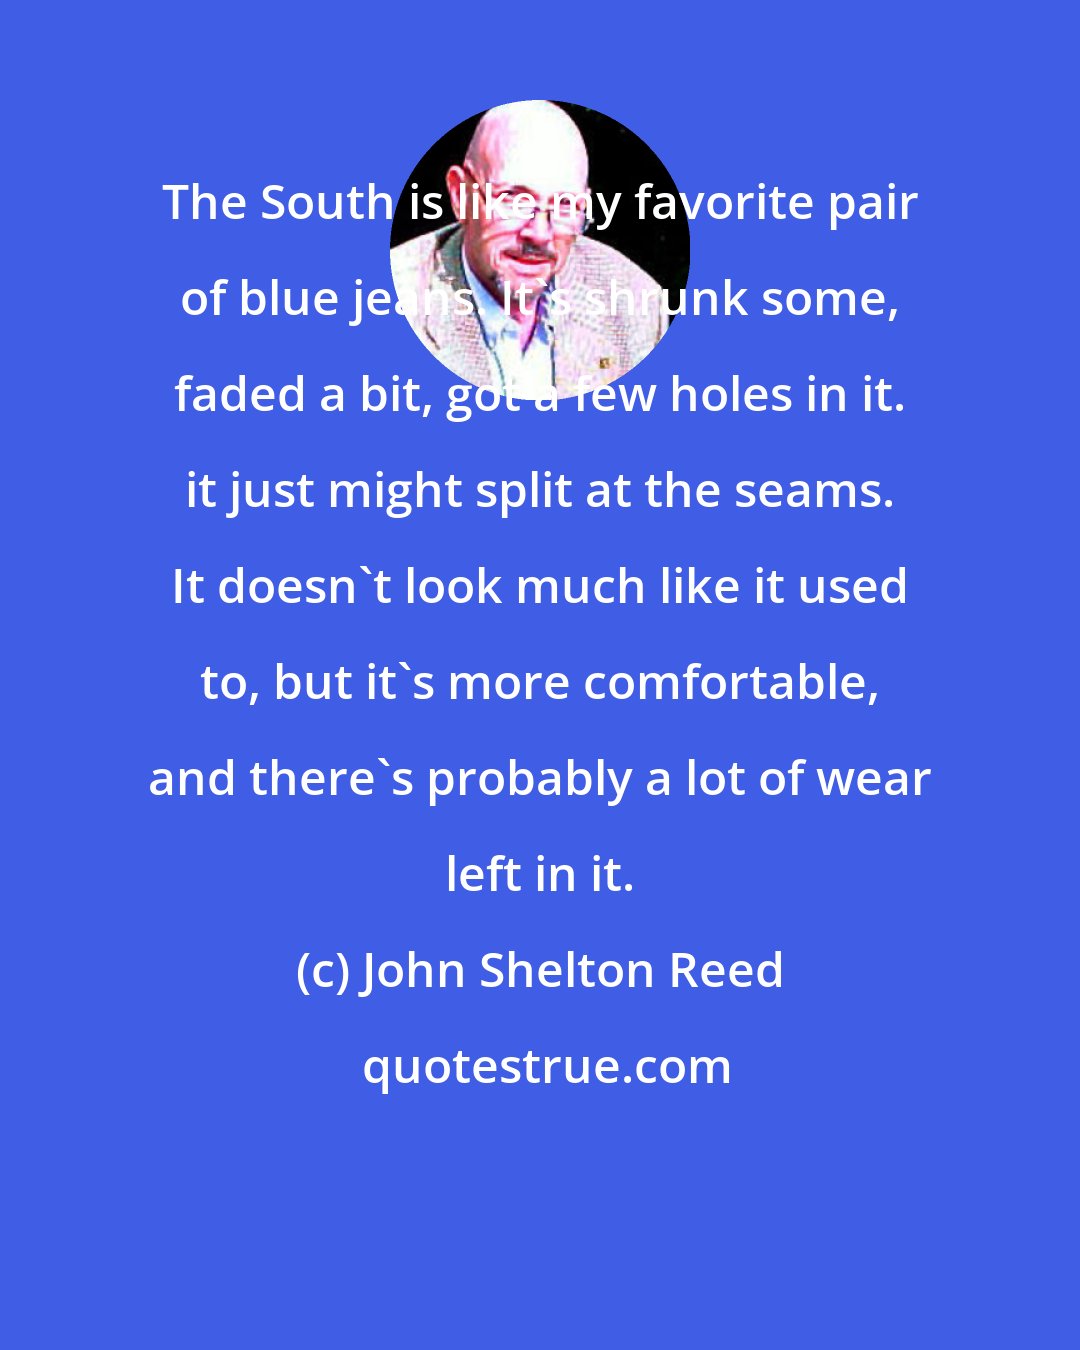 John Shelton Reed: The South is like my favorite pair of blue jeans. It's shrunk some, faded a bit, got a few holes in it. it just might split at the seams. It doesn't look much like it used to, but it's more comfortable, and there's probably a lot of wear left in it.